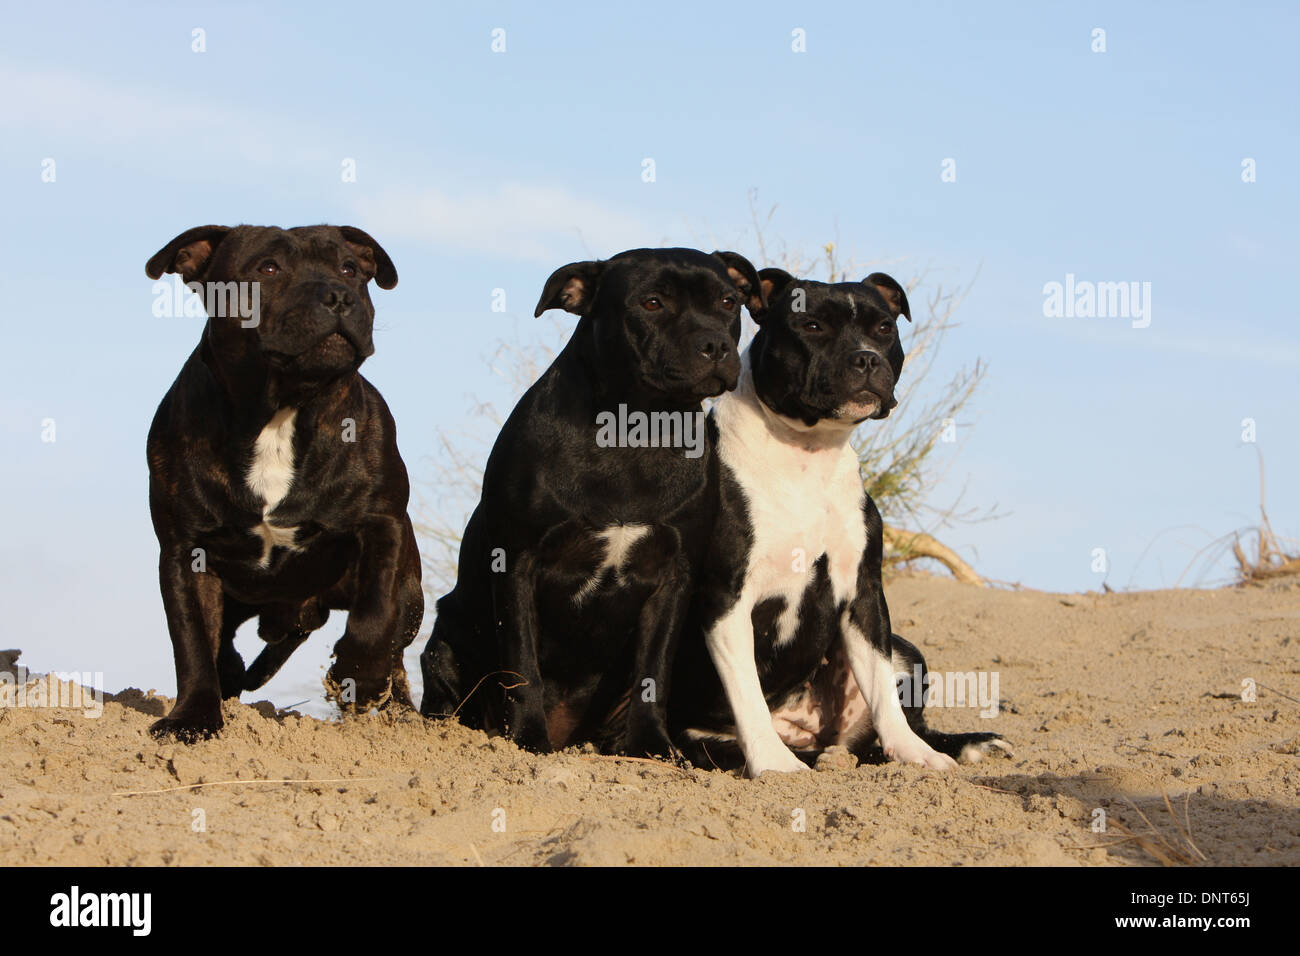 dog Staffordshire Bull Terrier / Staffie  three adults on the sand Stock Photo